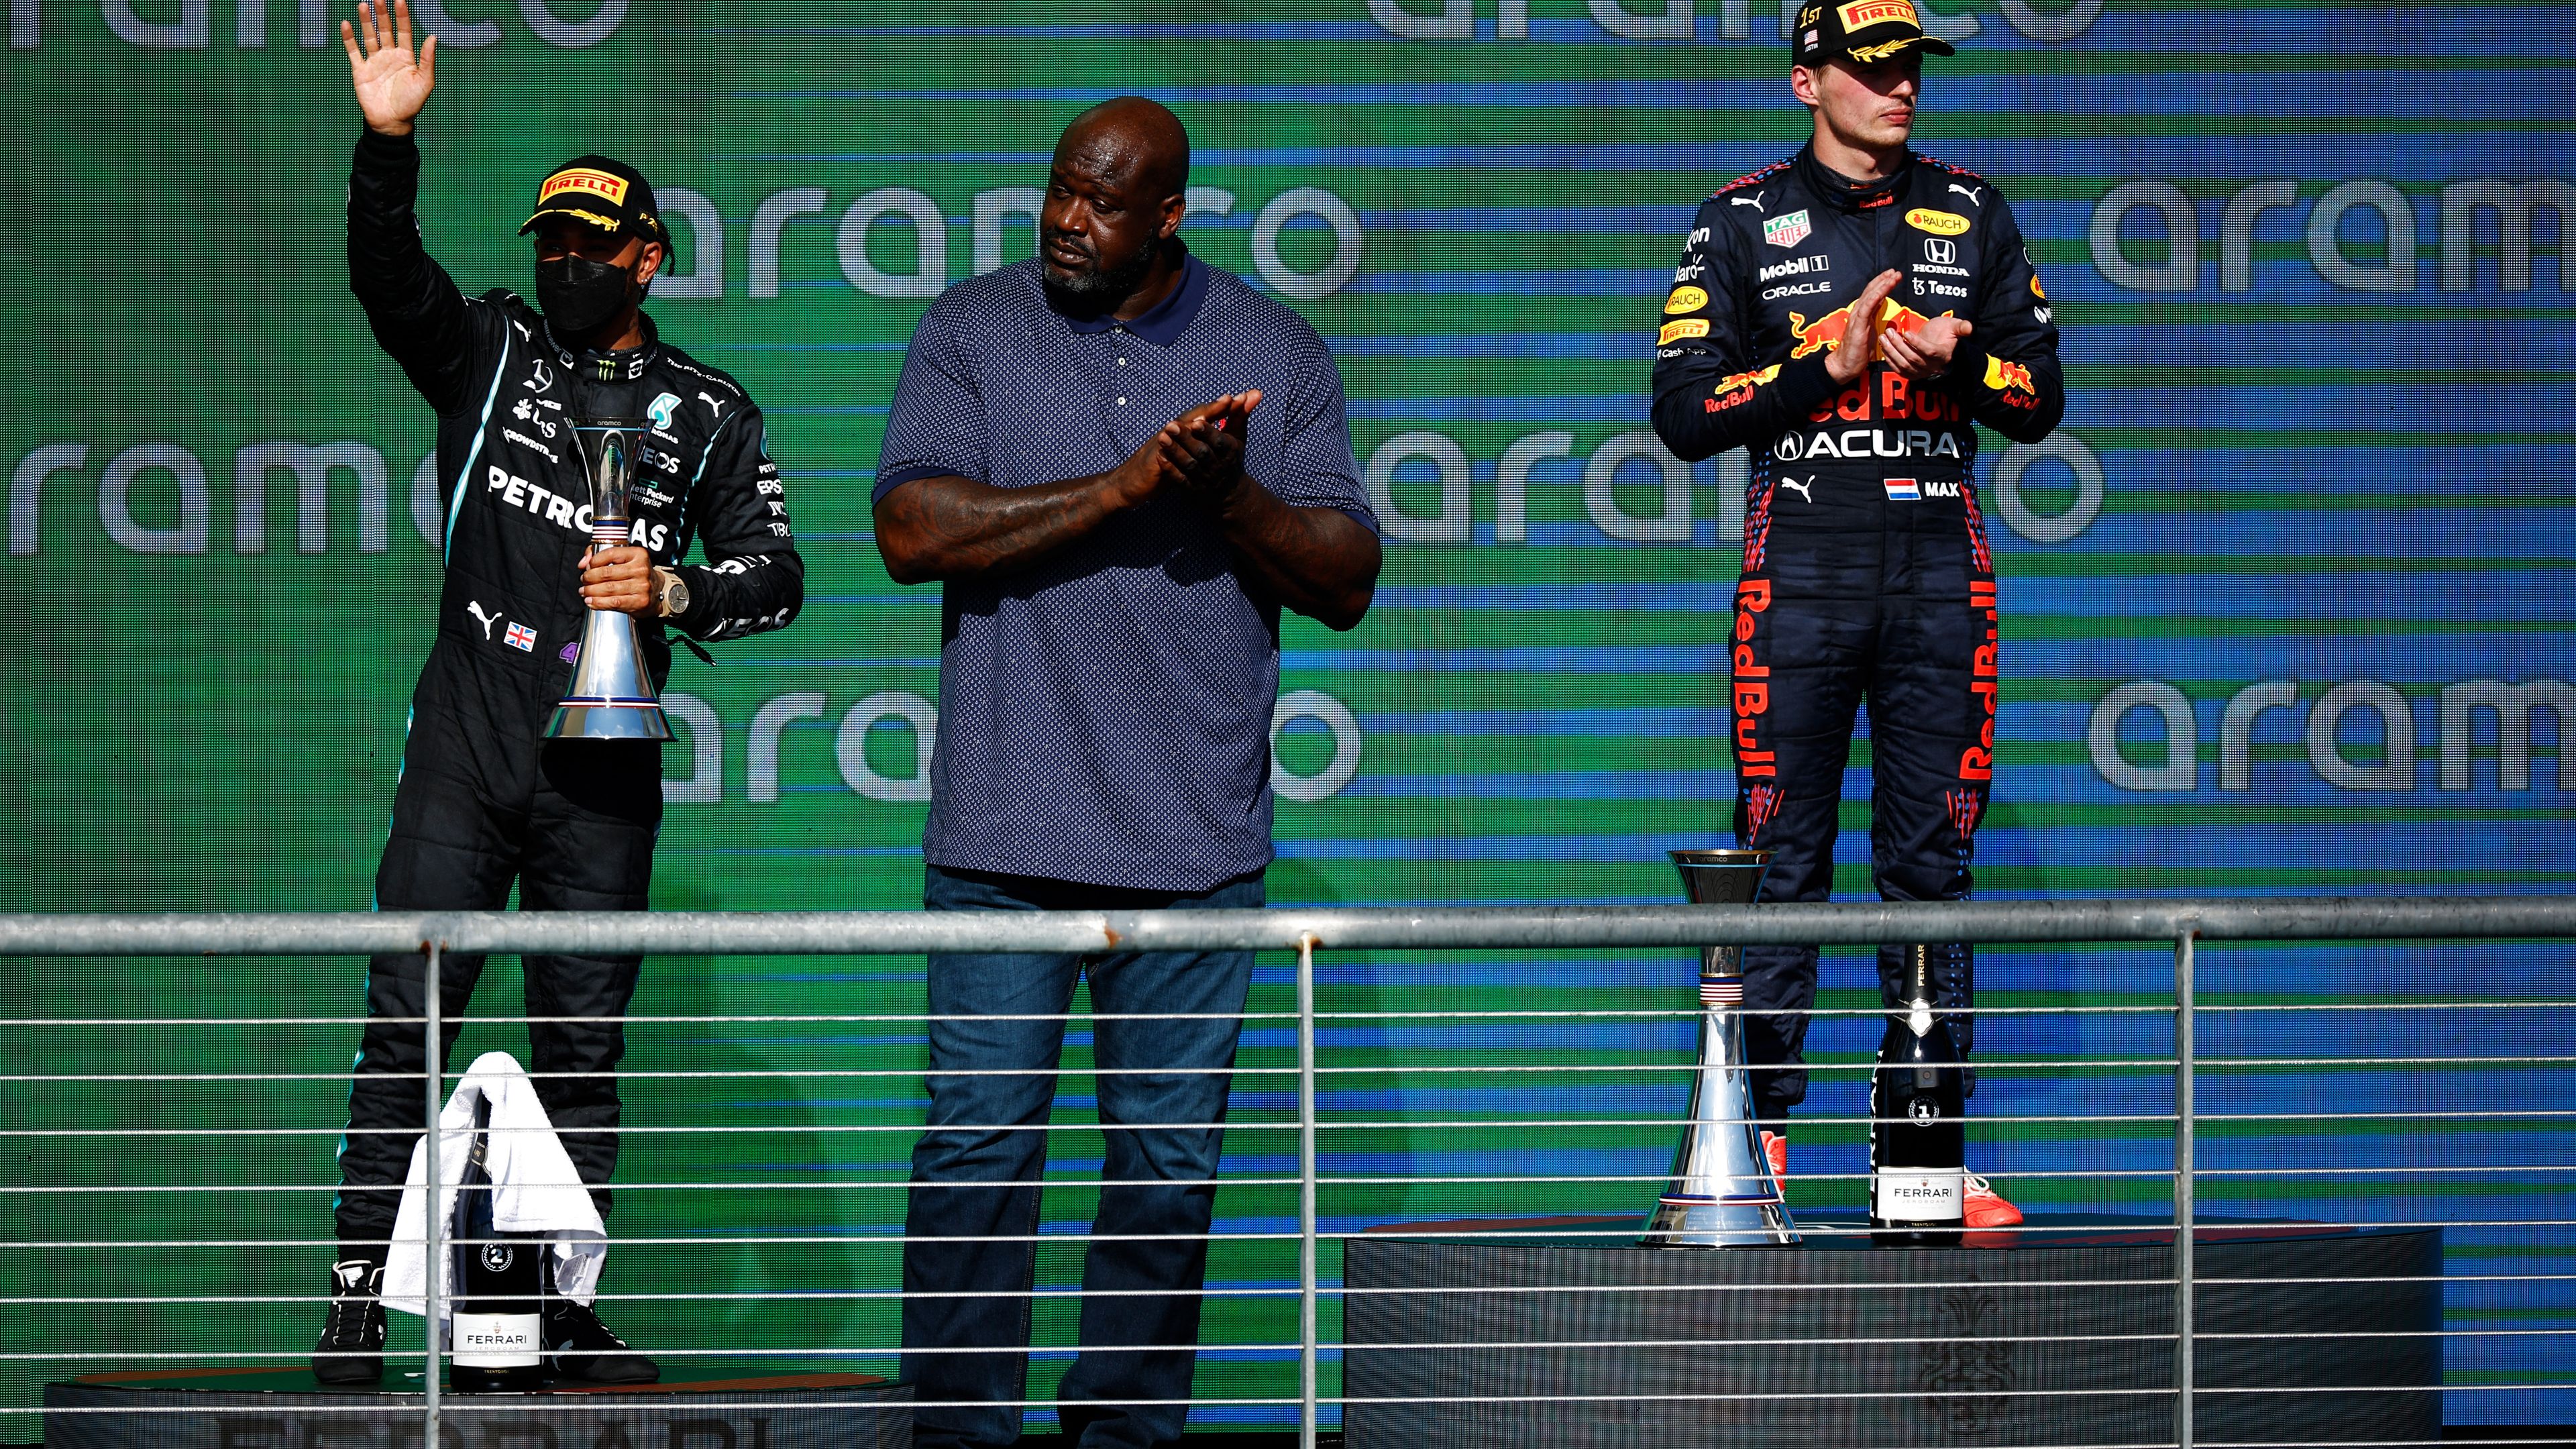 NBA legend Shaquille O&#x27;Neal on the podium with Lewis Hamilton (left) and Max Verstappen at the US Grand Prix.